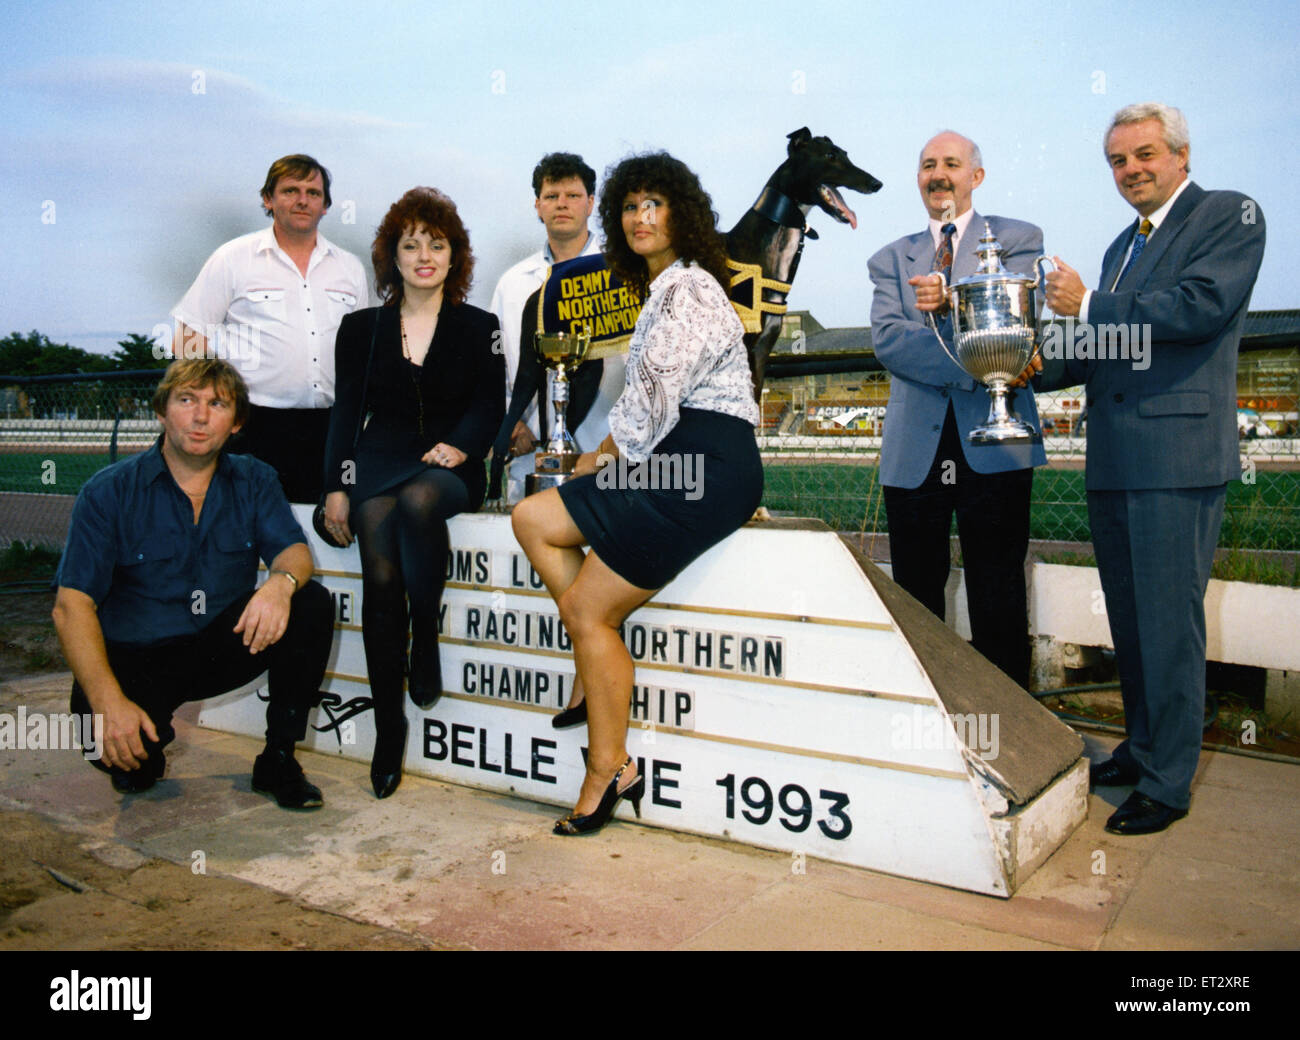 Norman Johnson receives the Demmy Racing Northern Flat Championship trophy from the sponsor's managing director Ken johnston with Mick Bacon, Tony Bacon, kennelhand Andrew Hayes, Lisa Hayes and Stella Leonard looking on at Belle Vue greyhound stadium. Jul Stock Photo